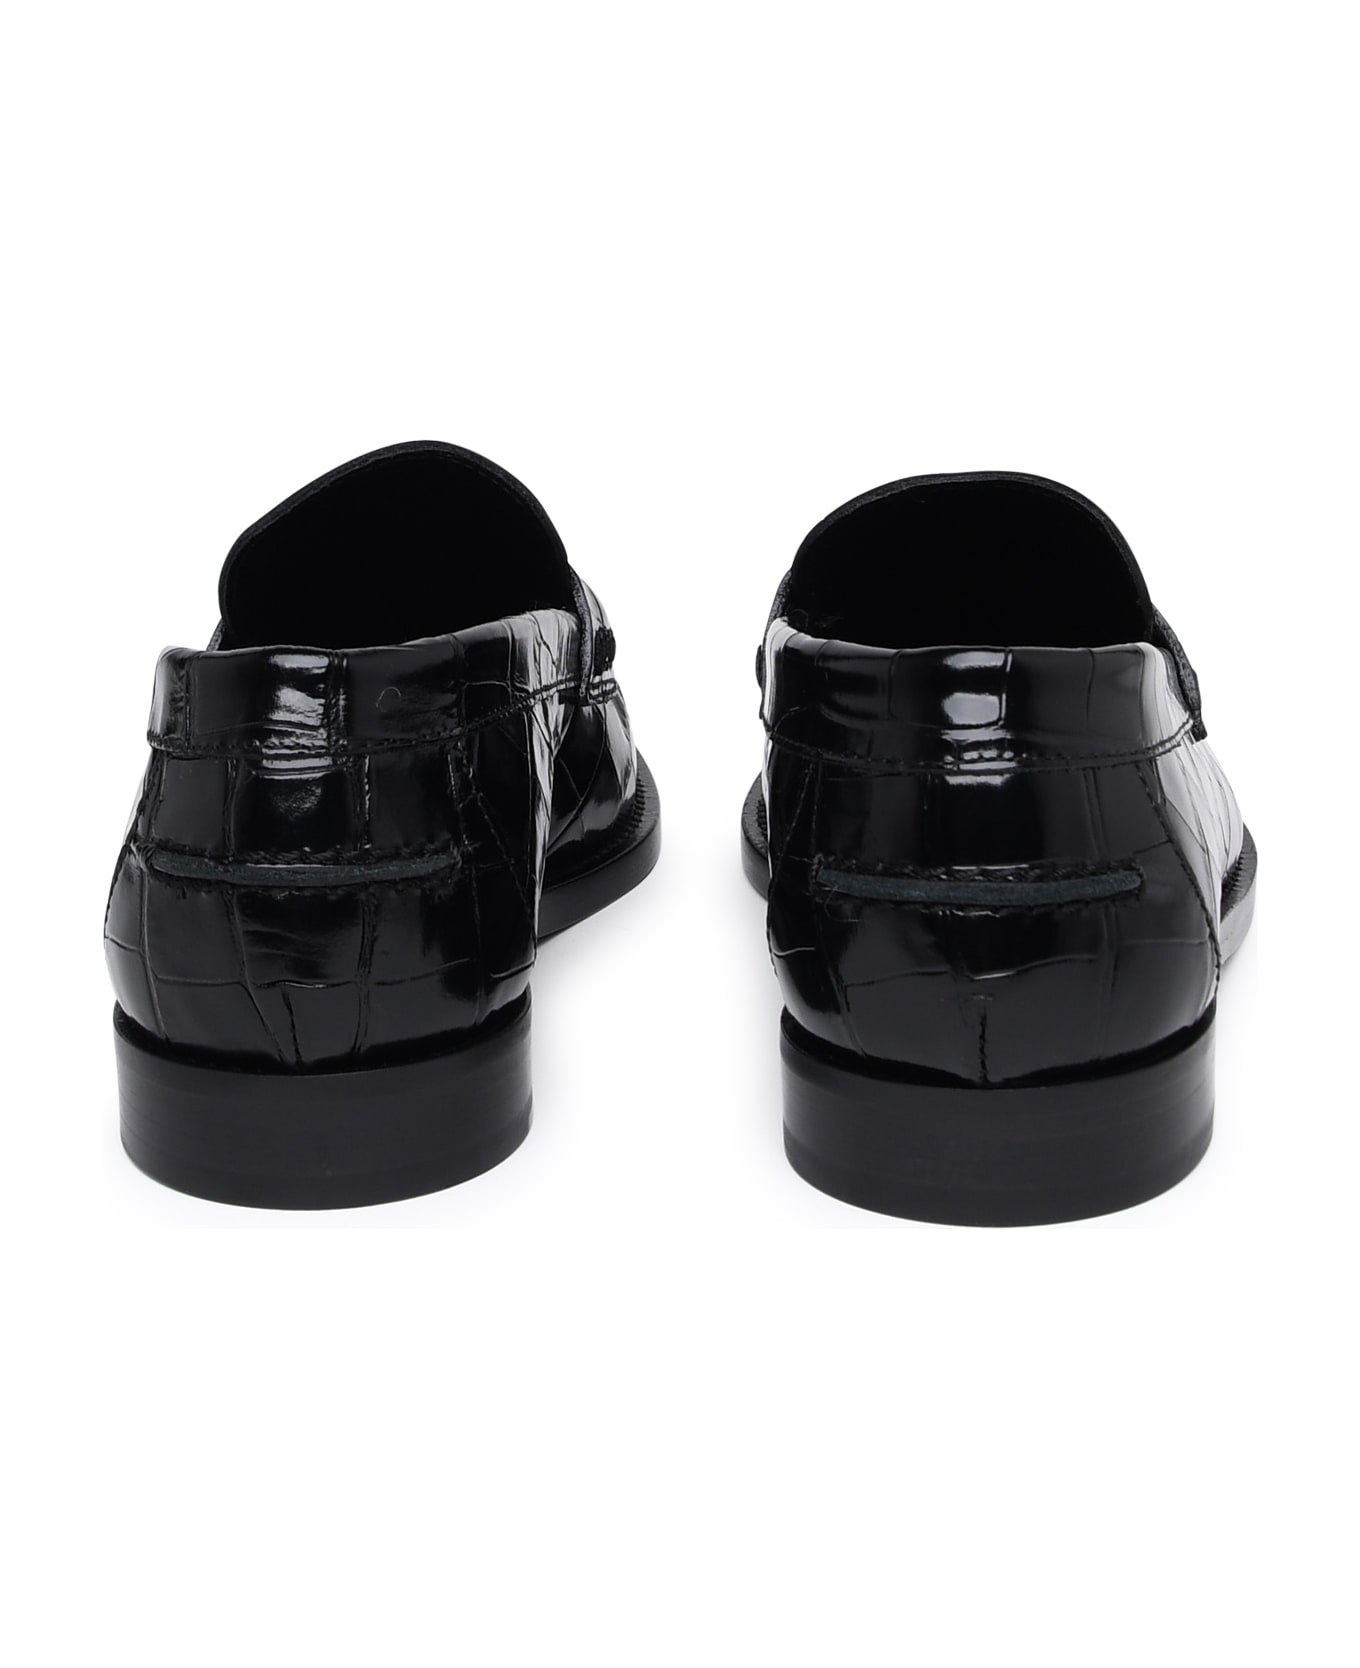 Versace Black Leather Loafers - Black